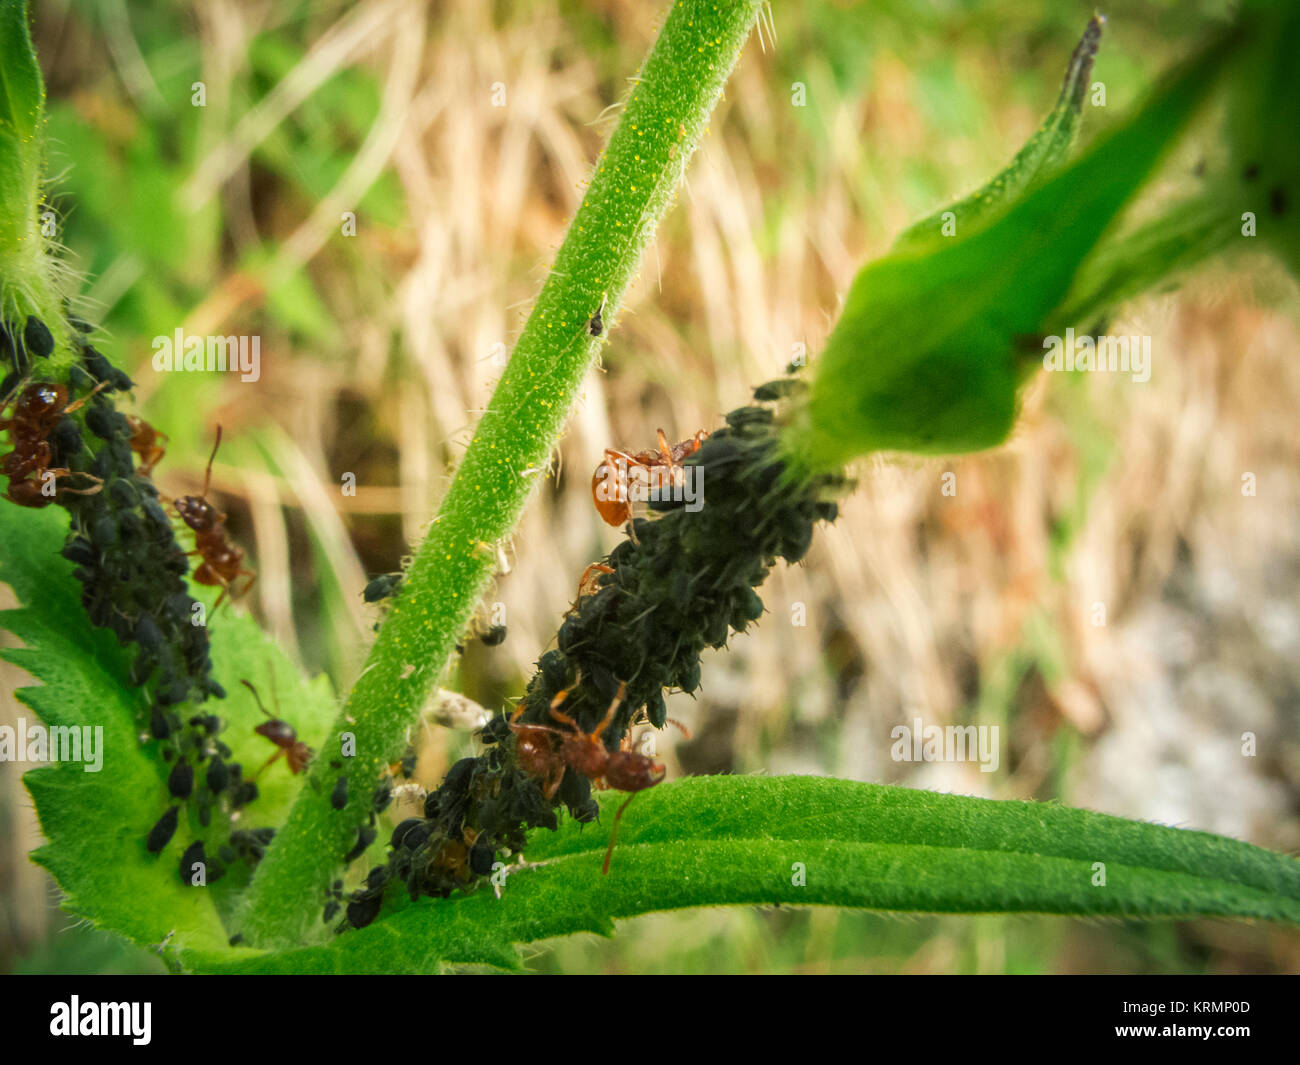 Macro view of black aphids (lat: Aphidoidea) on green plant stem with red ants (lat: Myrmica rubra), which milk the aphids. Stock Photo